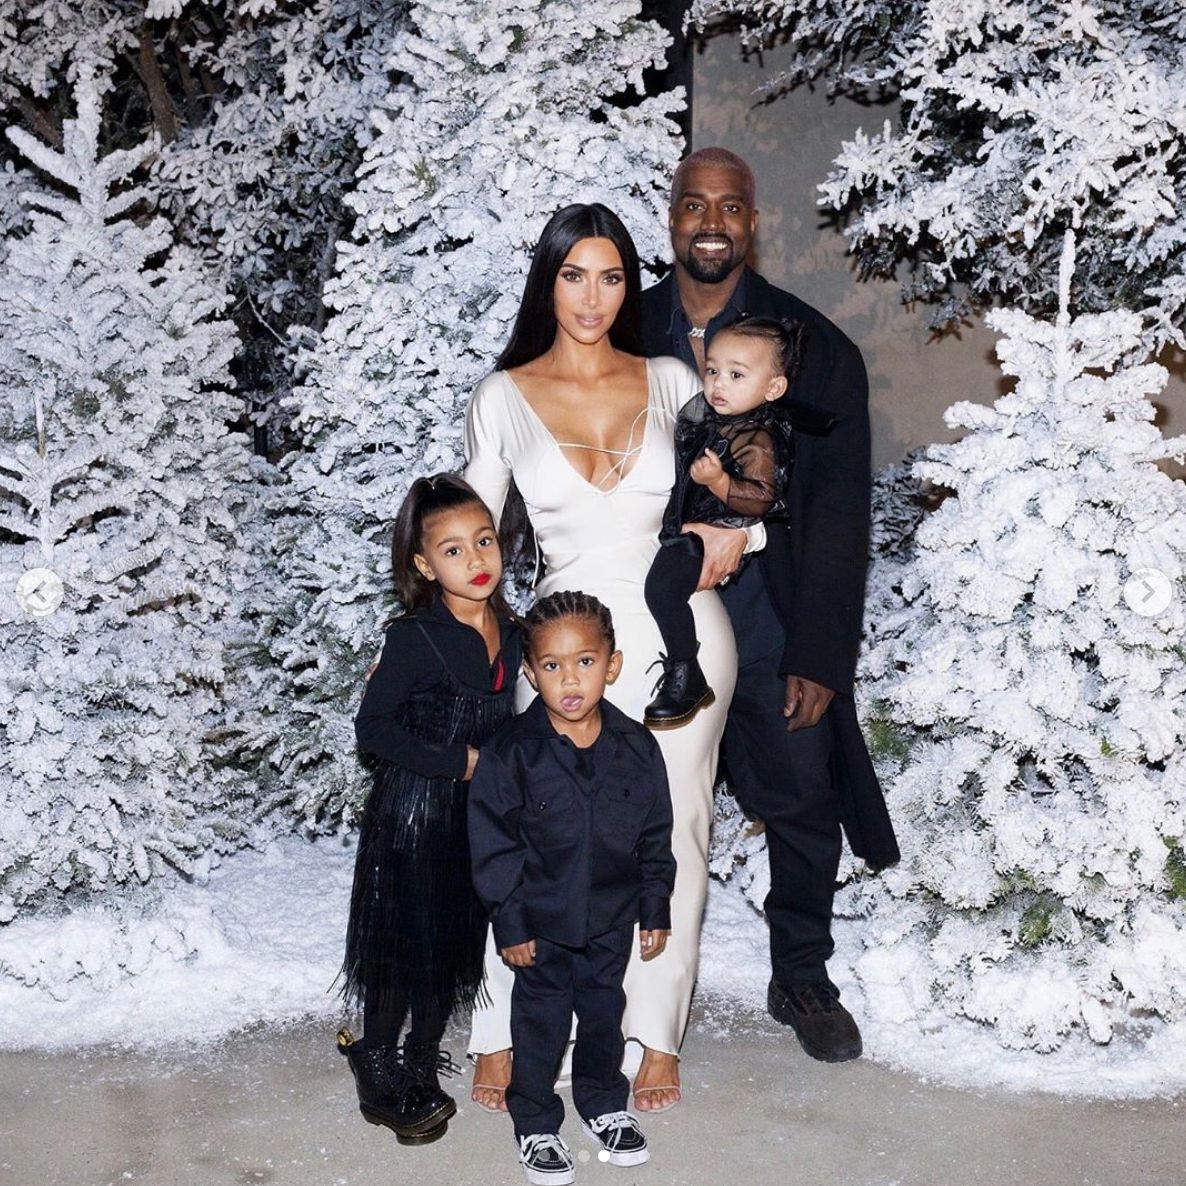 North was only five years old when the photos were taken